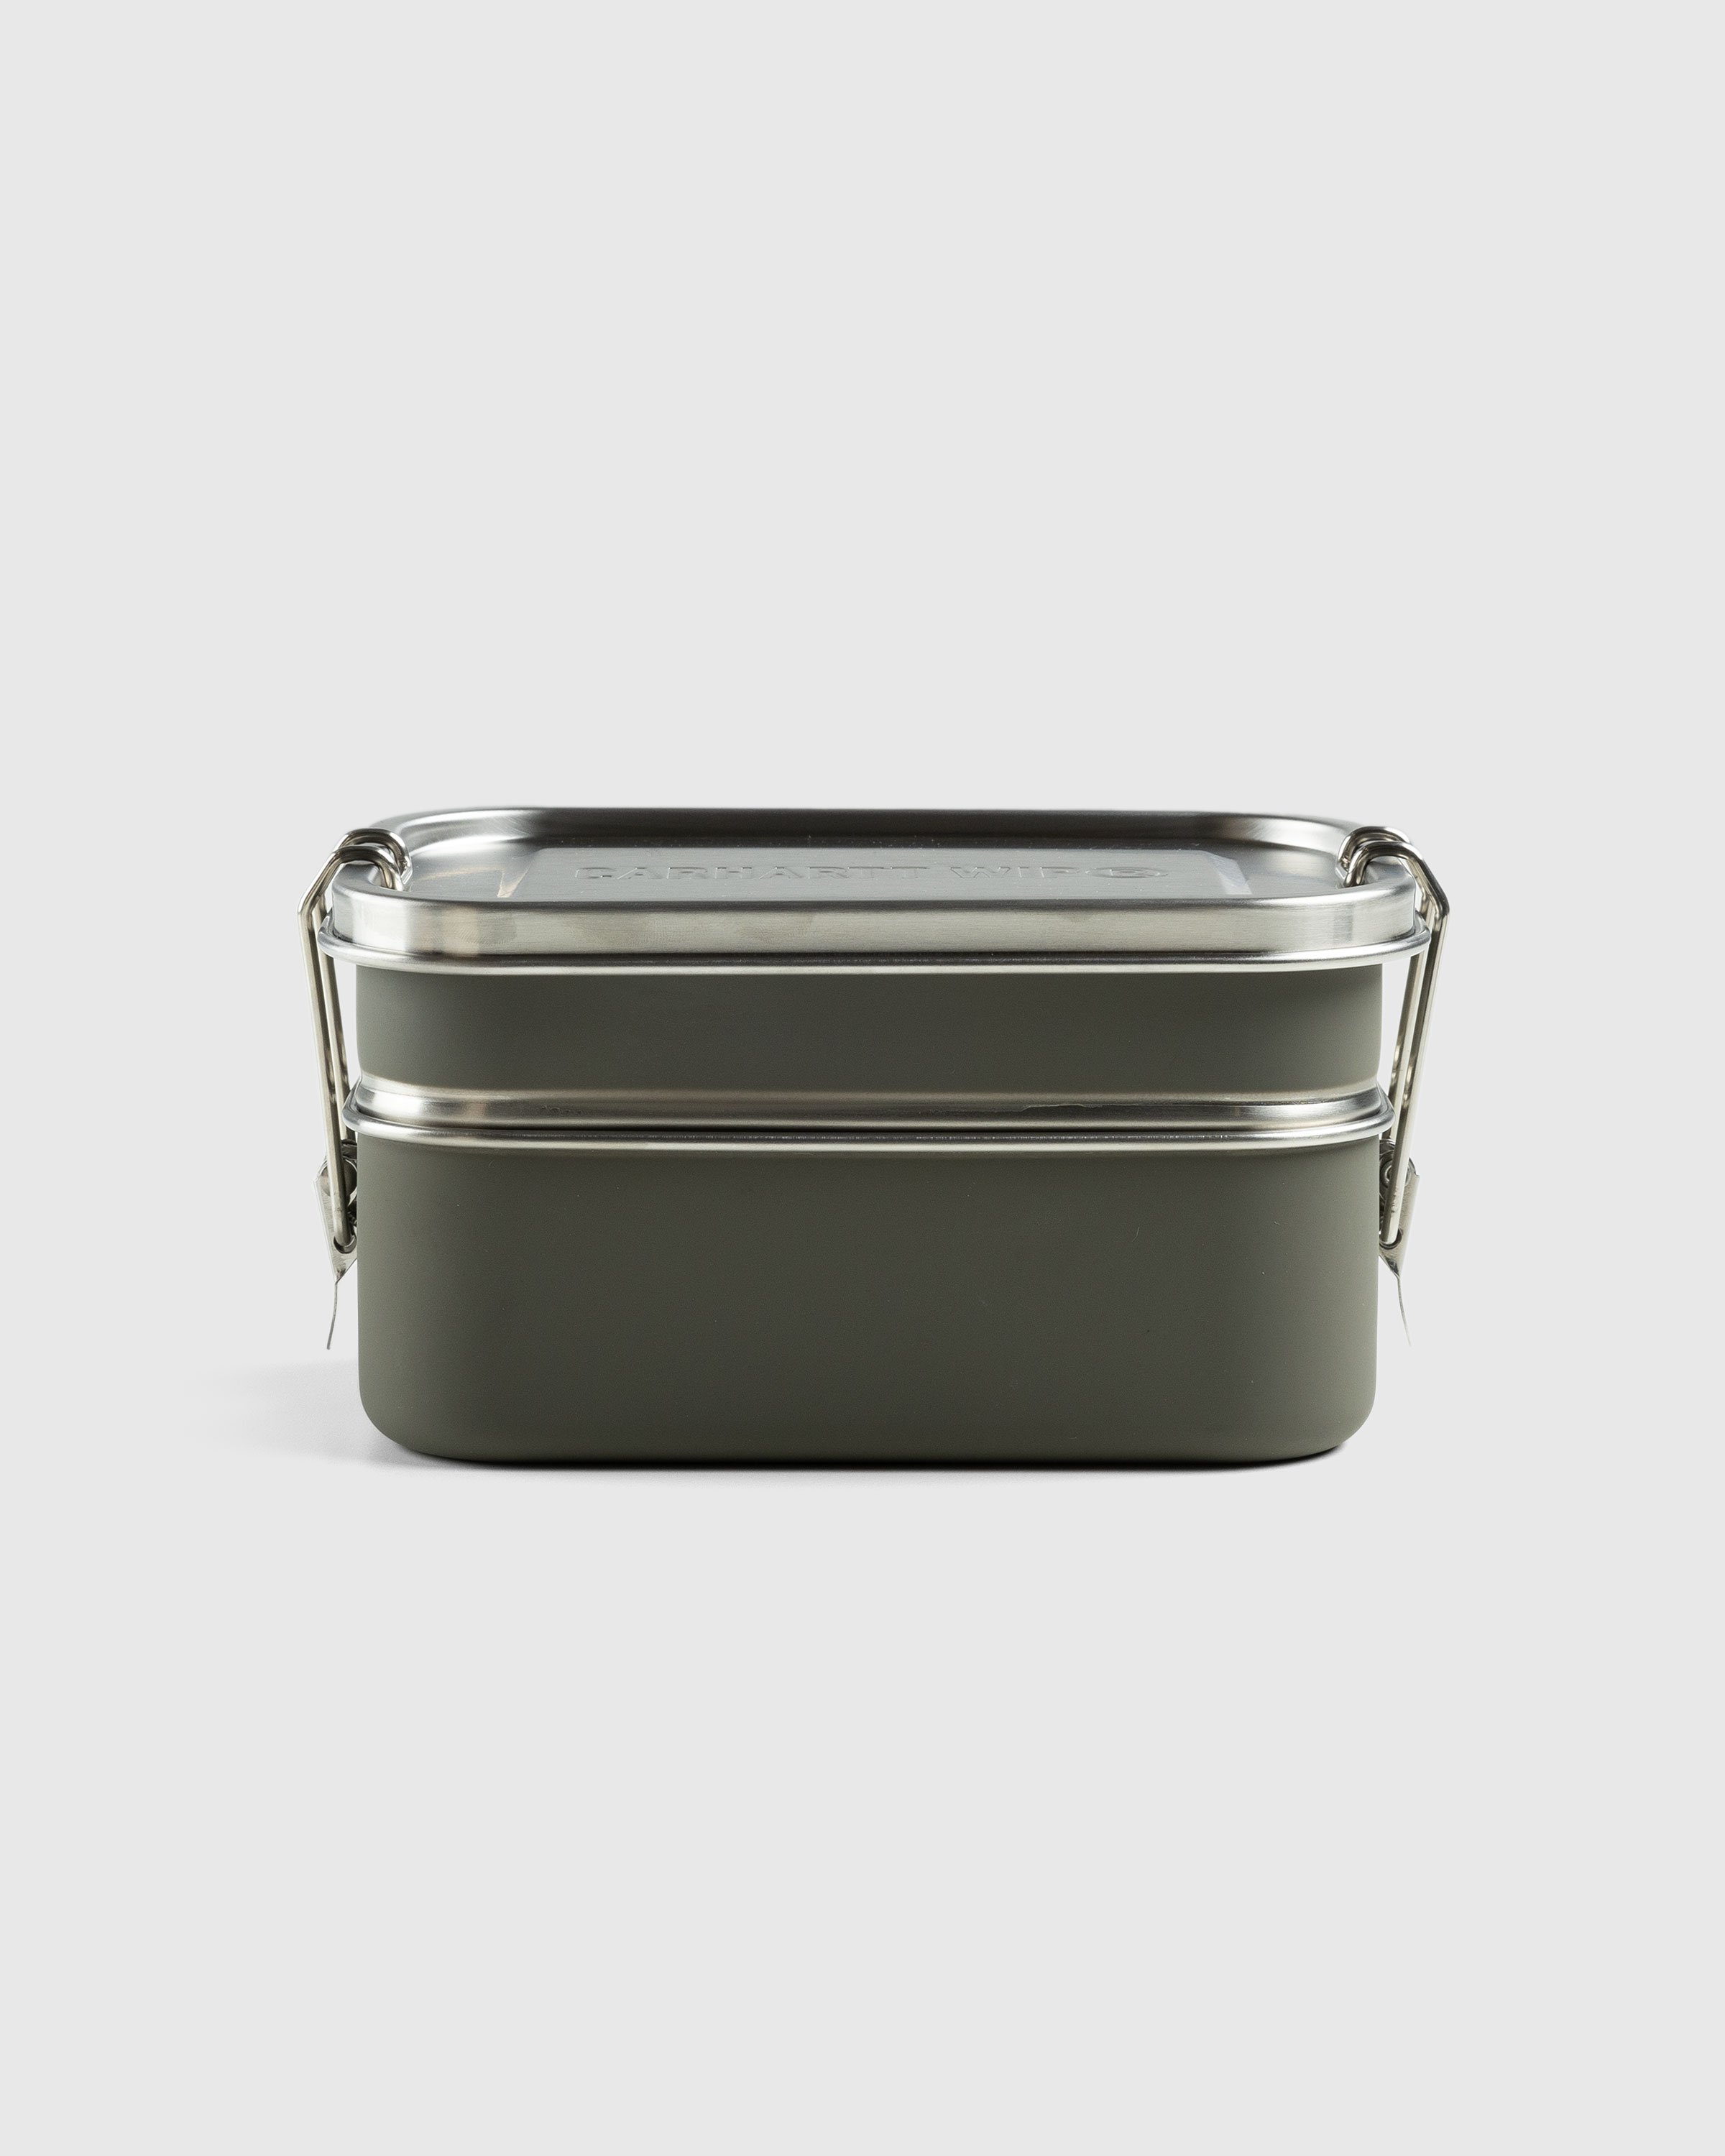 Carhartt WIP - Tour Lunch Box Green - Lifestyle - Green - Image 1